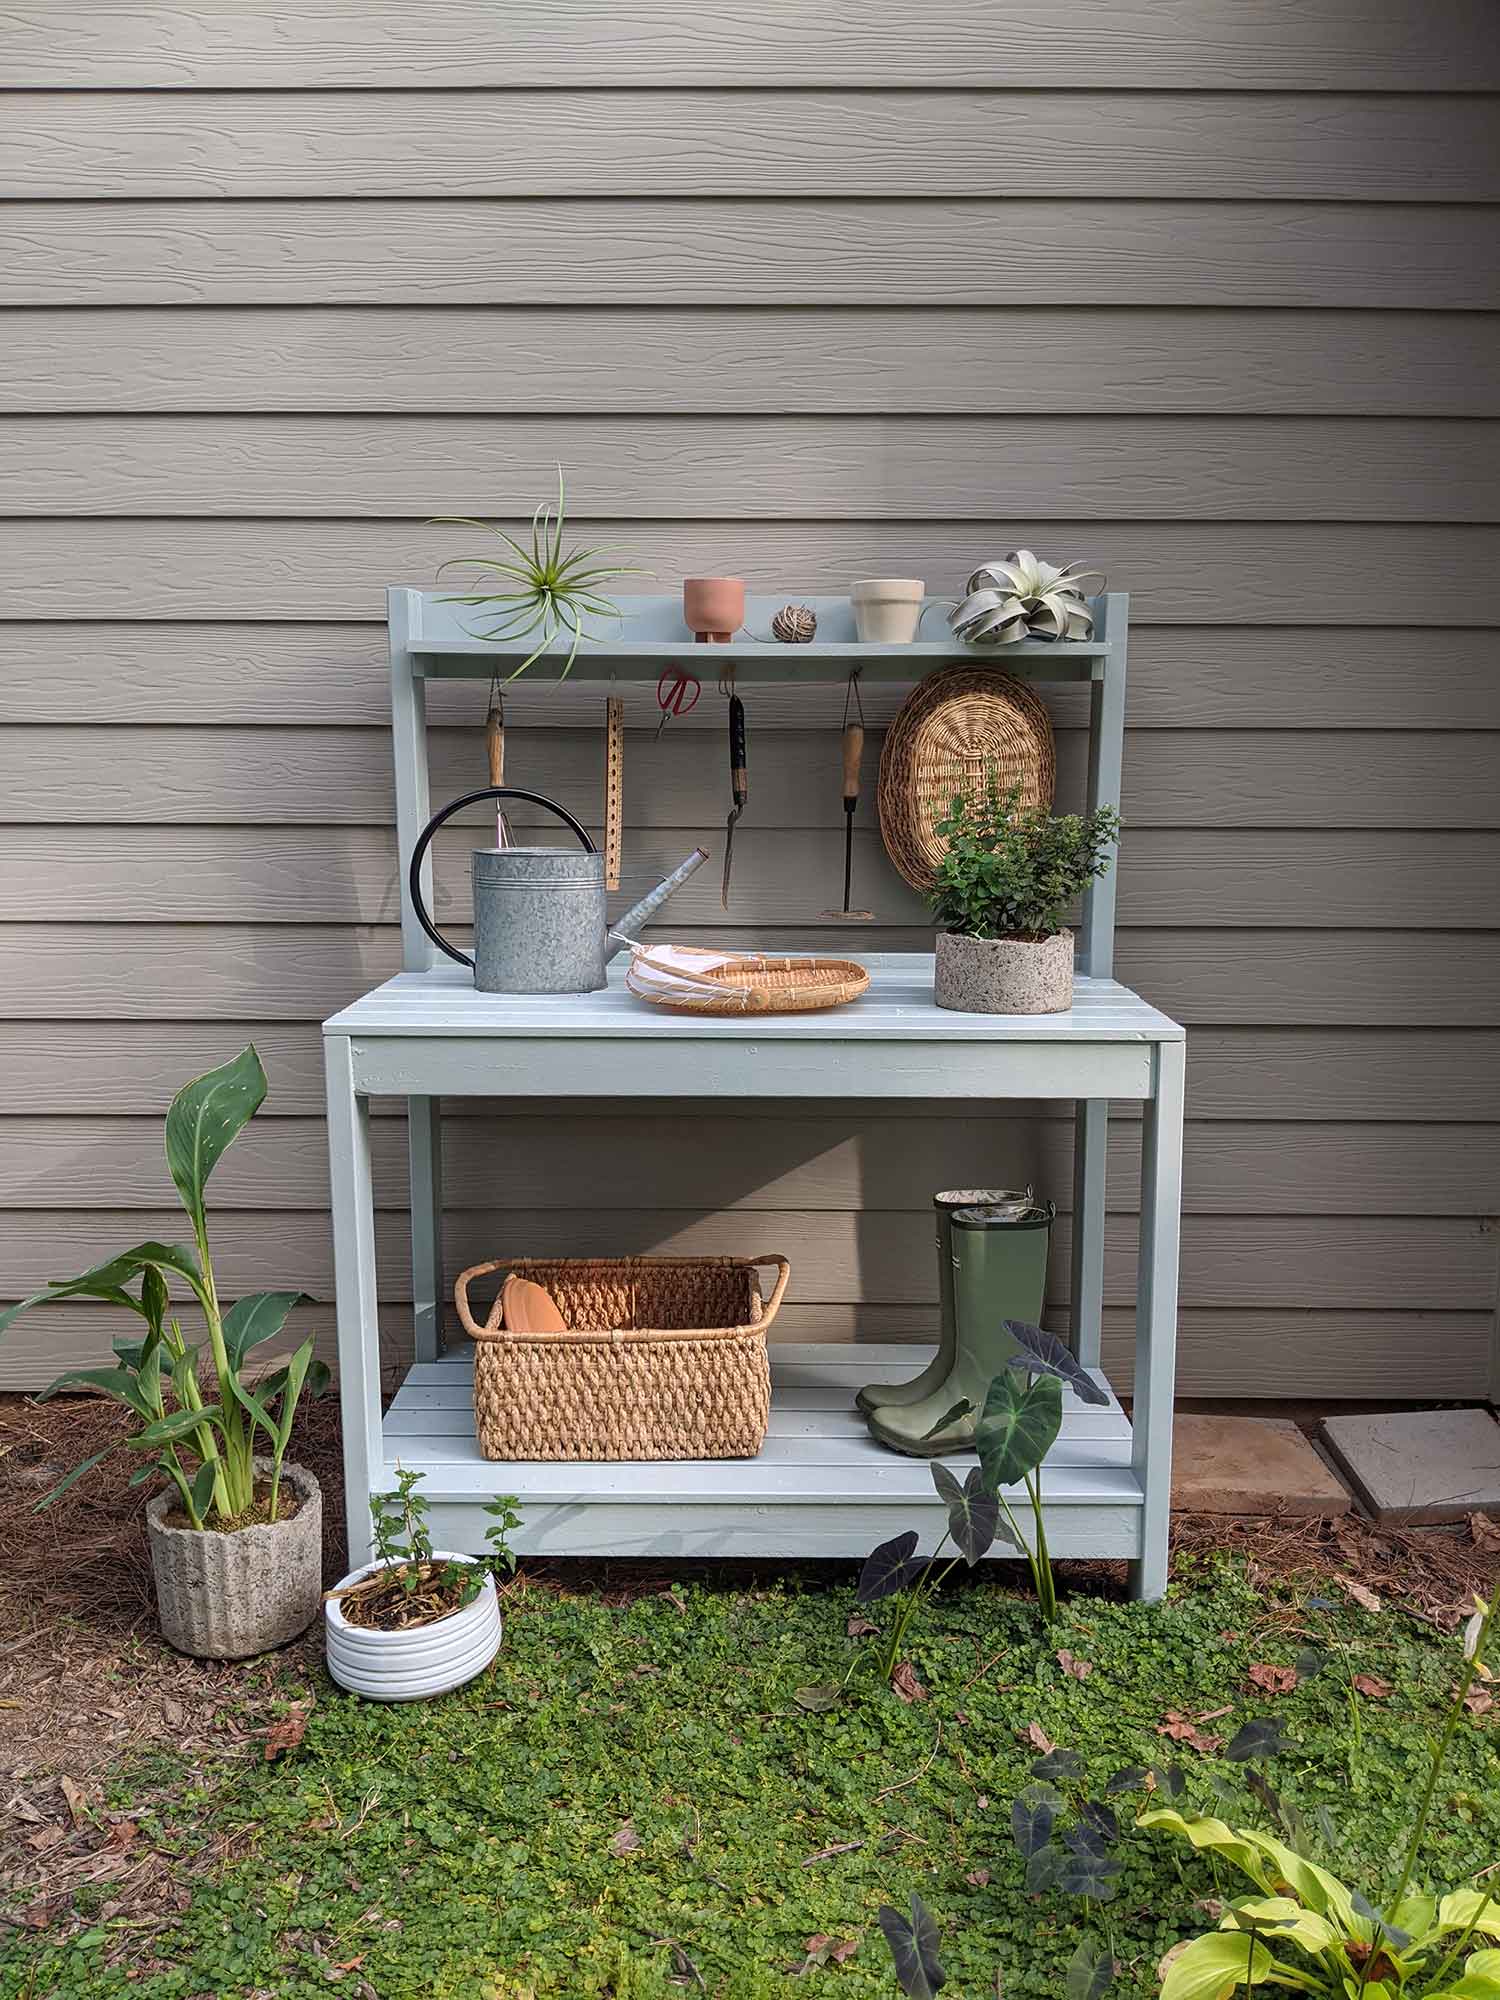 Finished potting table with plants, baskets, and watering can on top